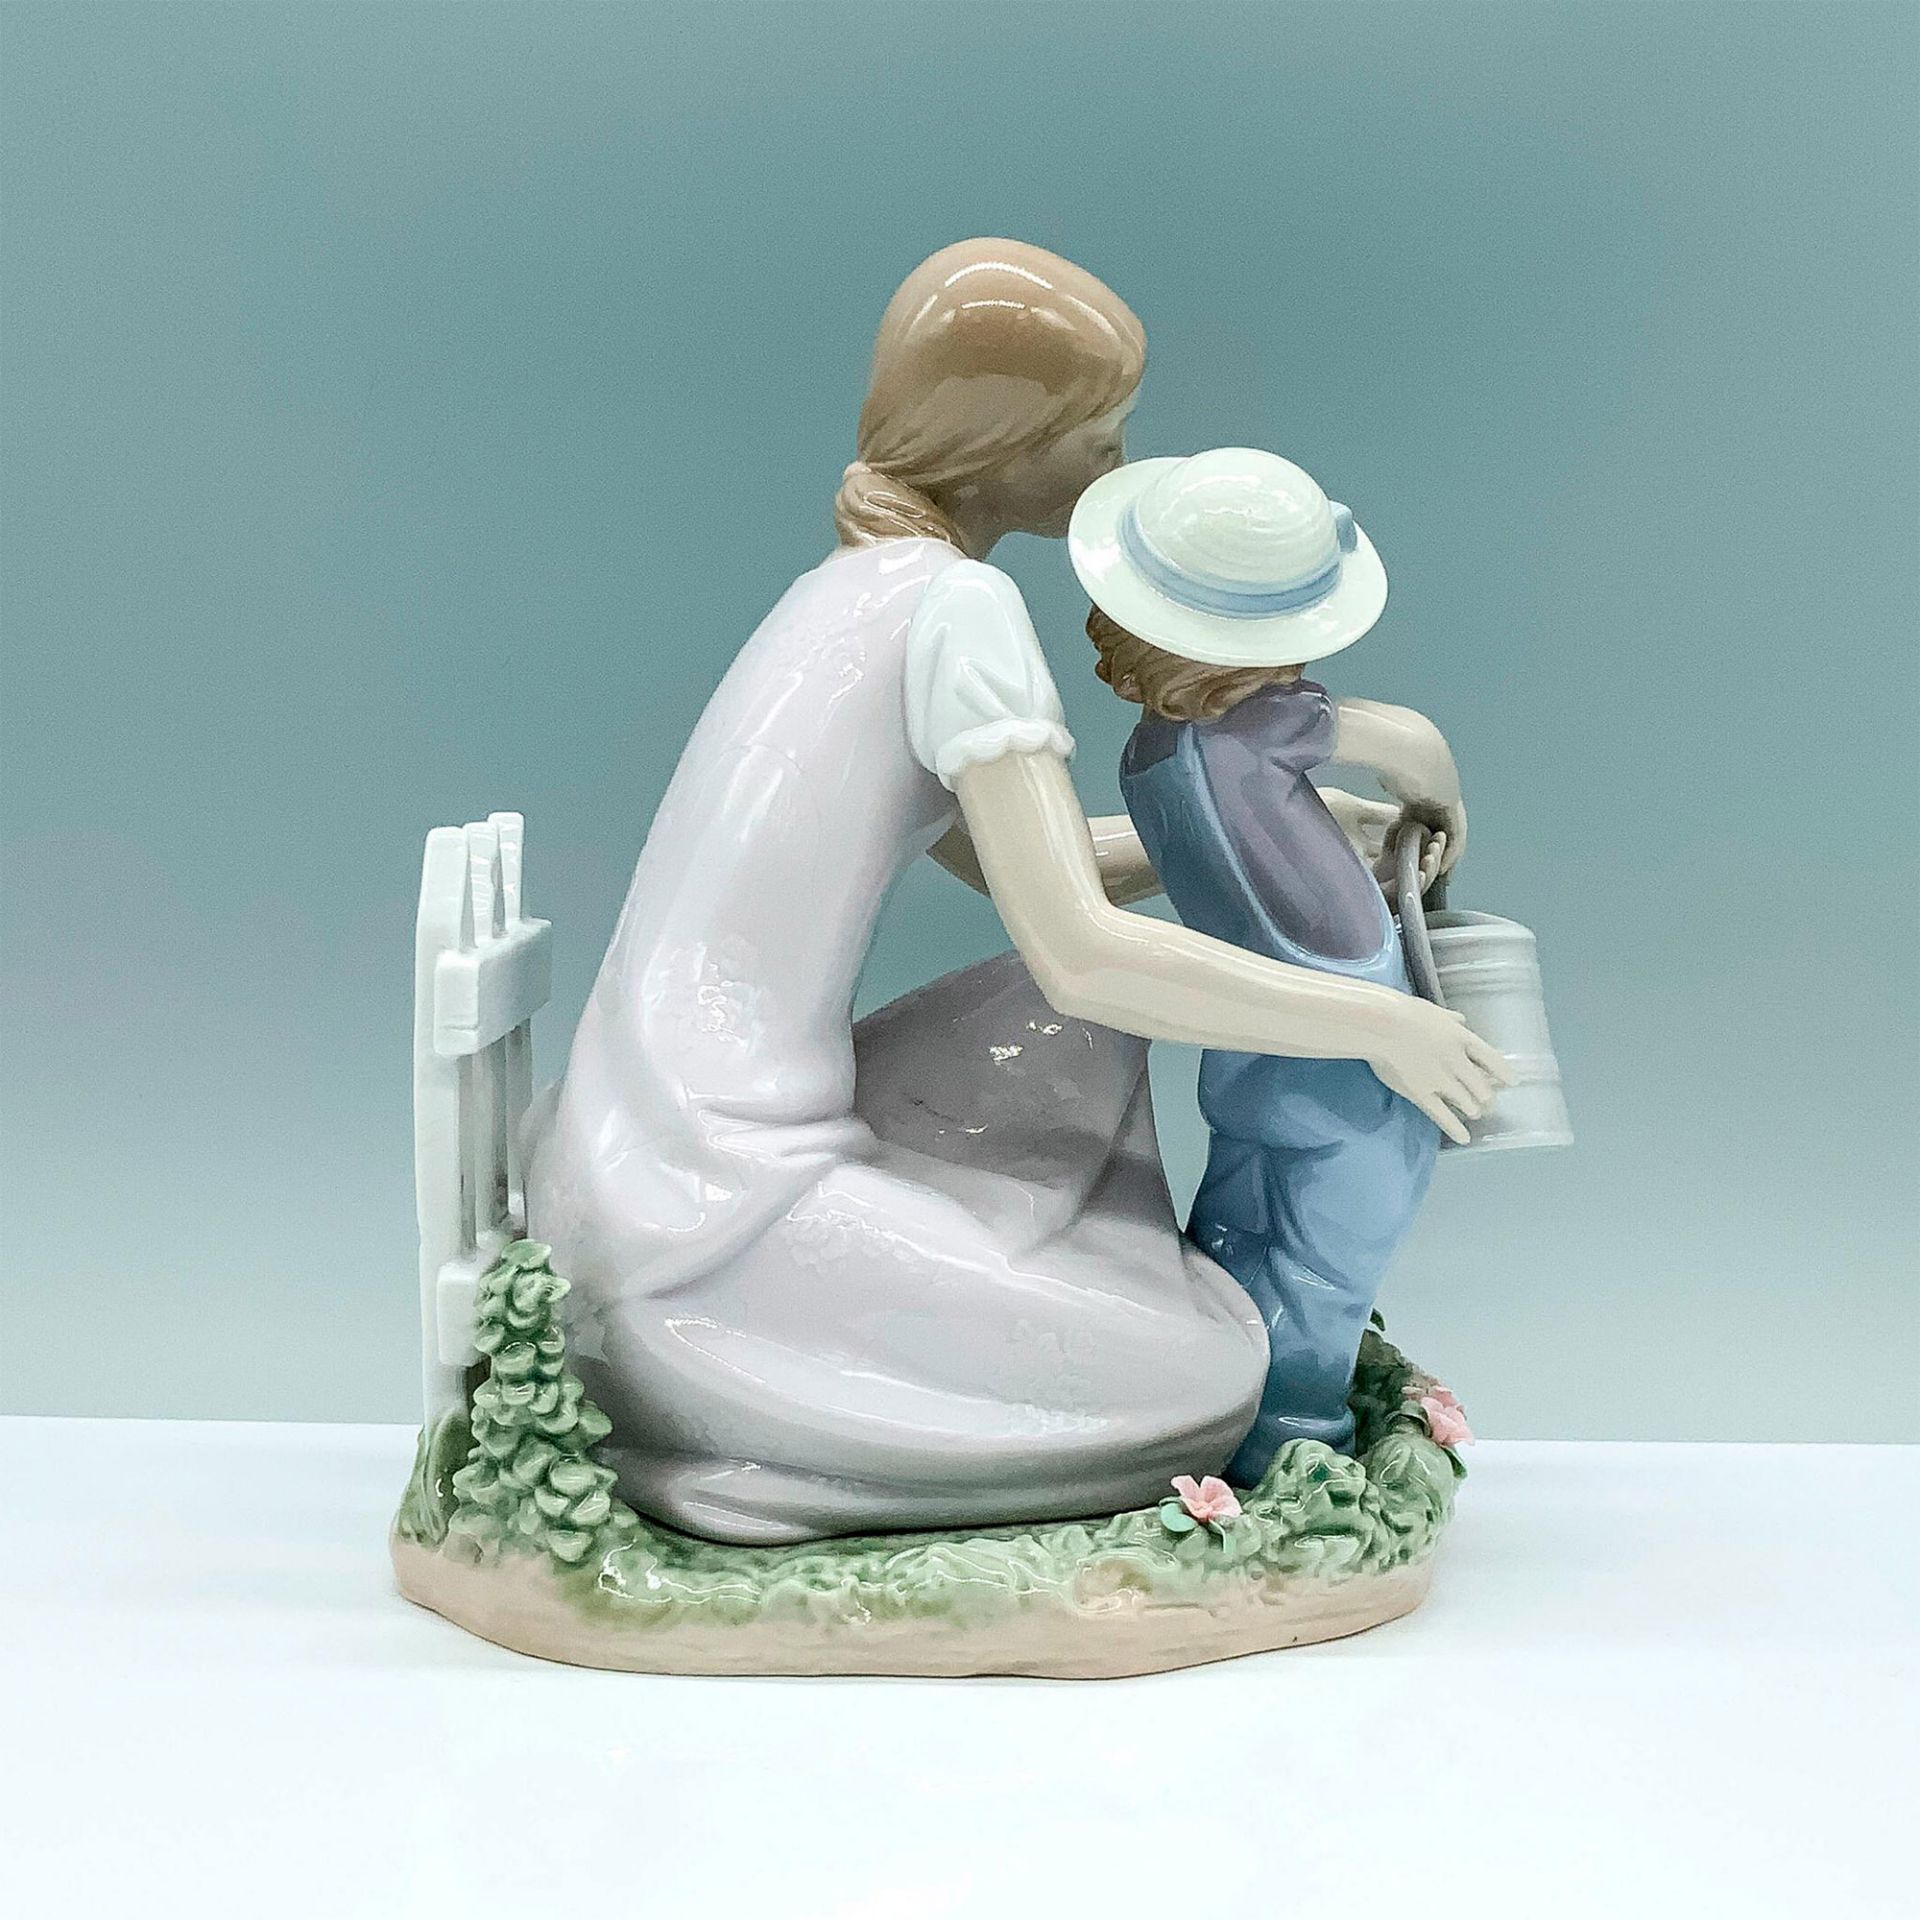 Lessons In The Garden 1008028 - Lladro Porcelain Figurine - Image 2 of 3